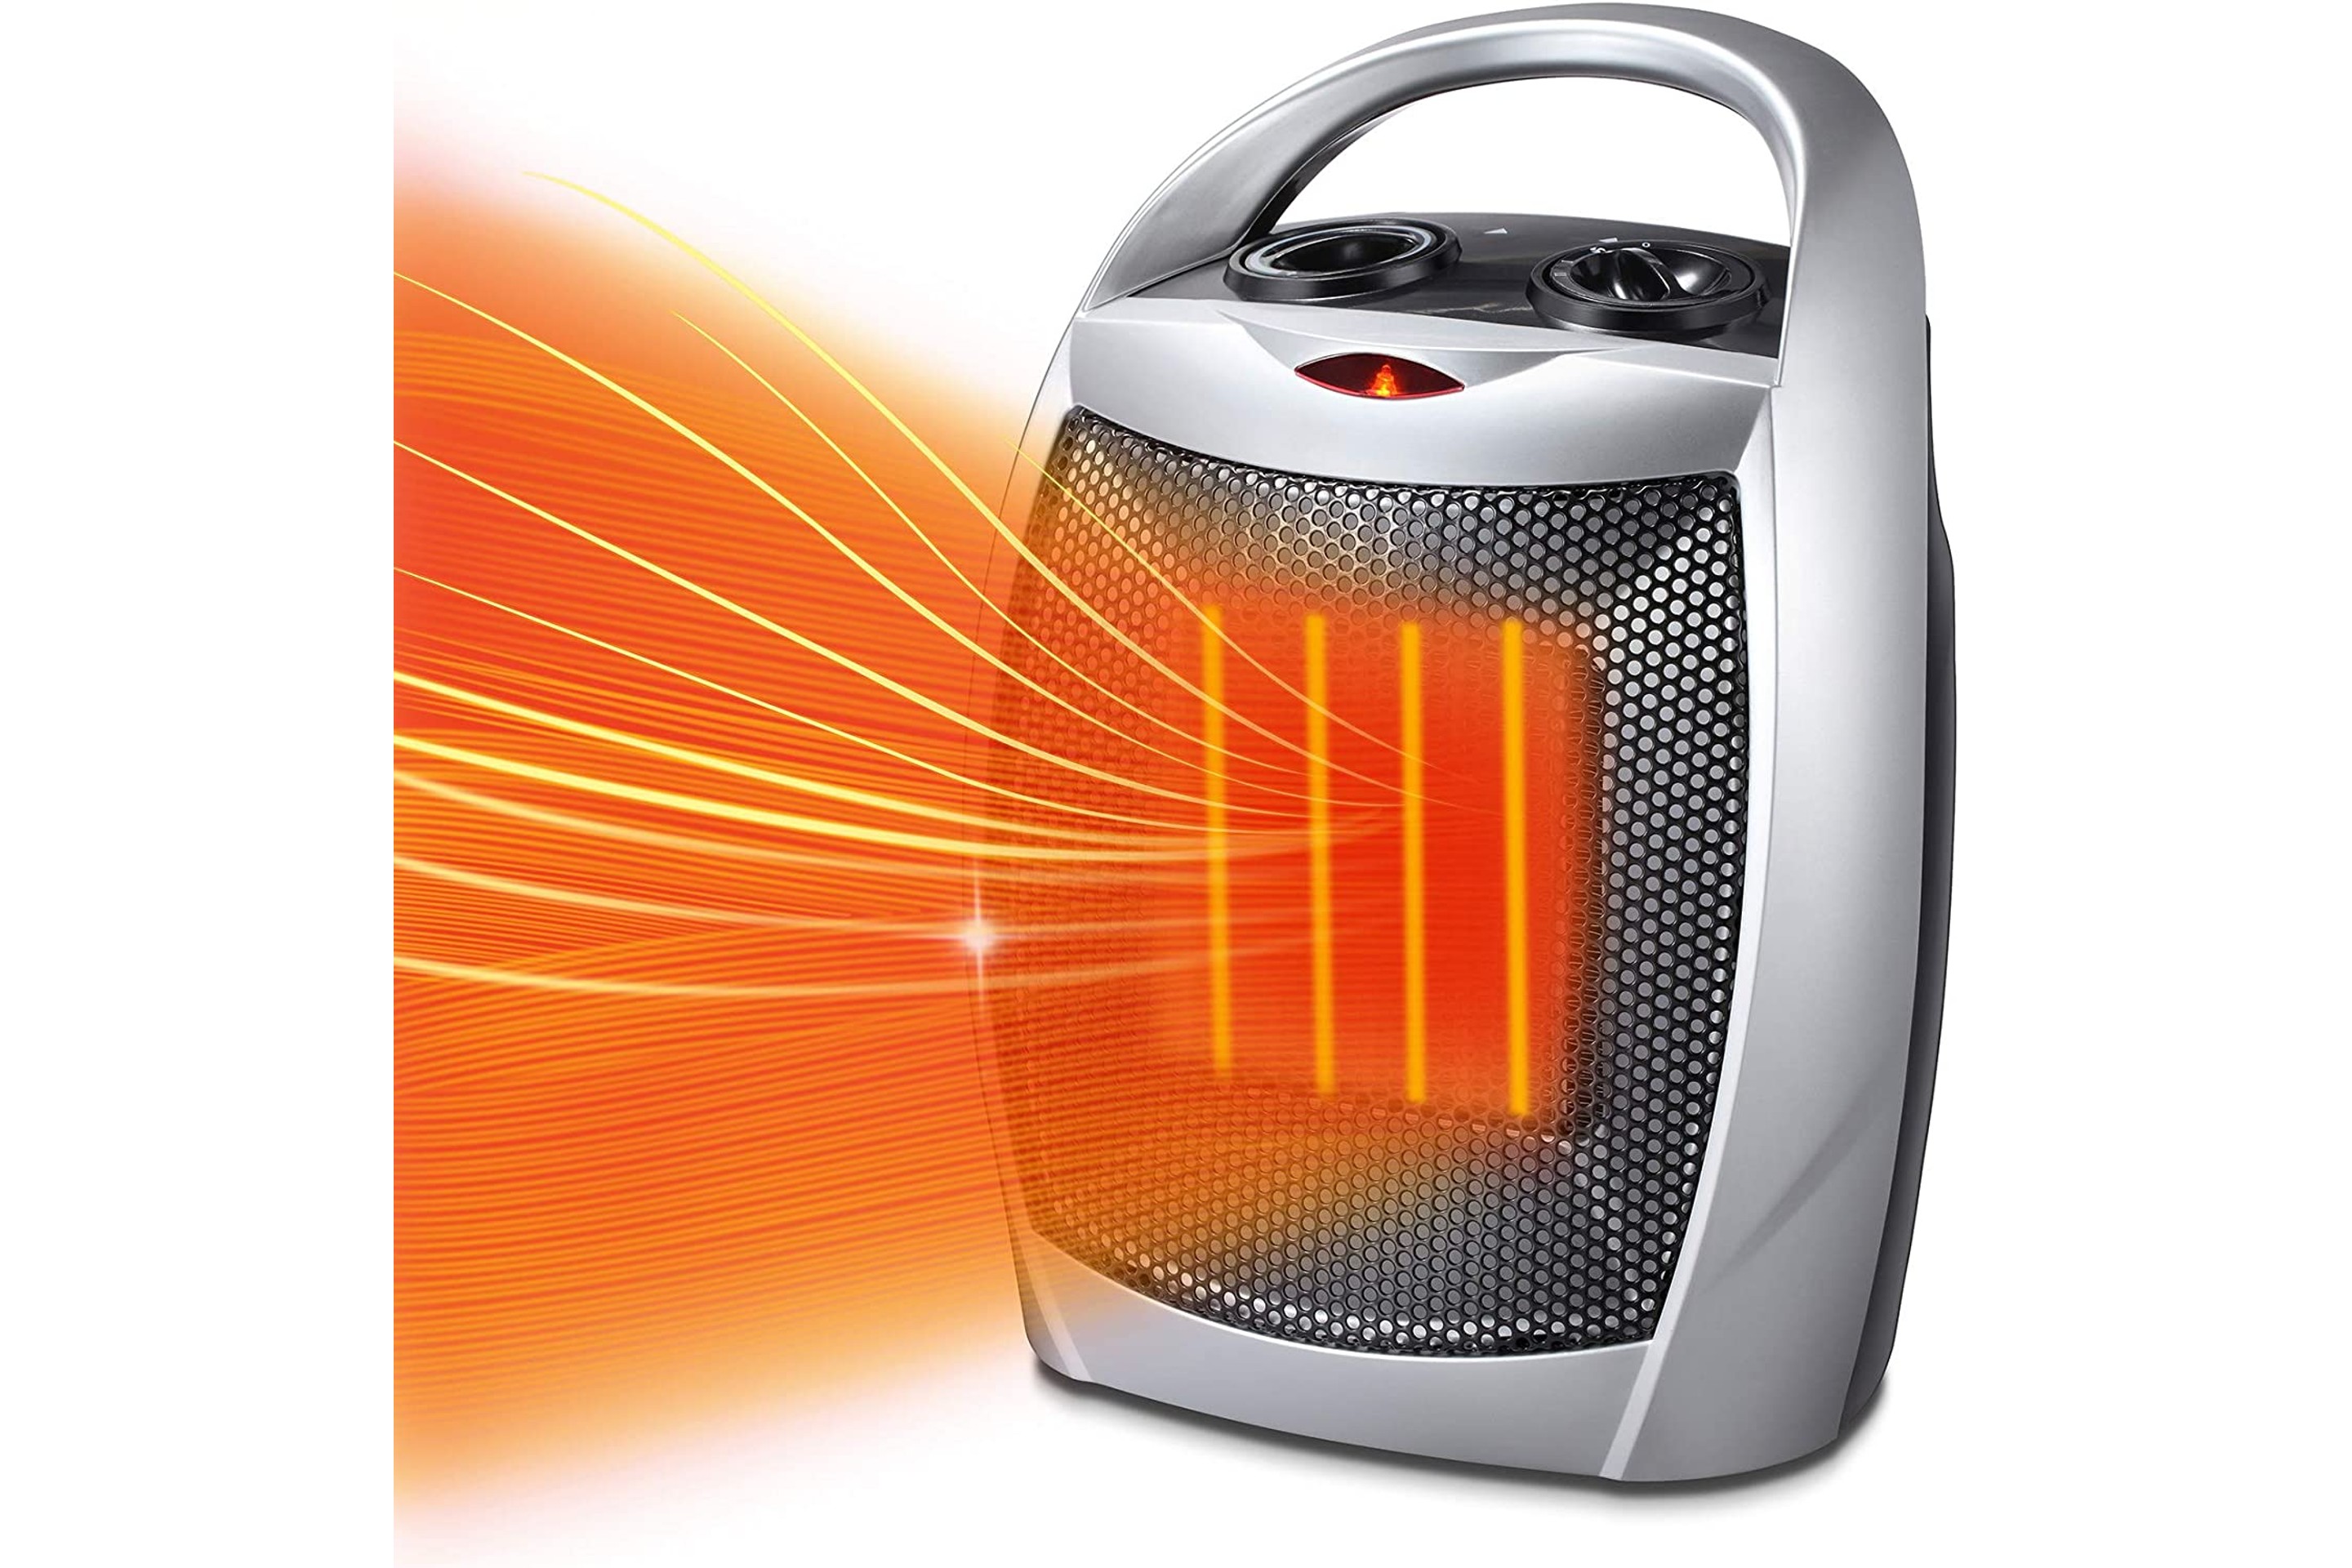 Kismile Small Electric Space Heater